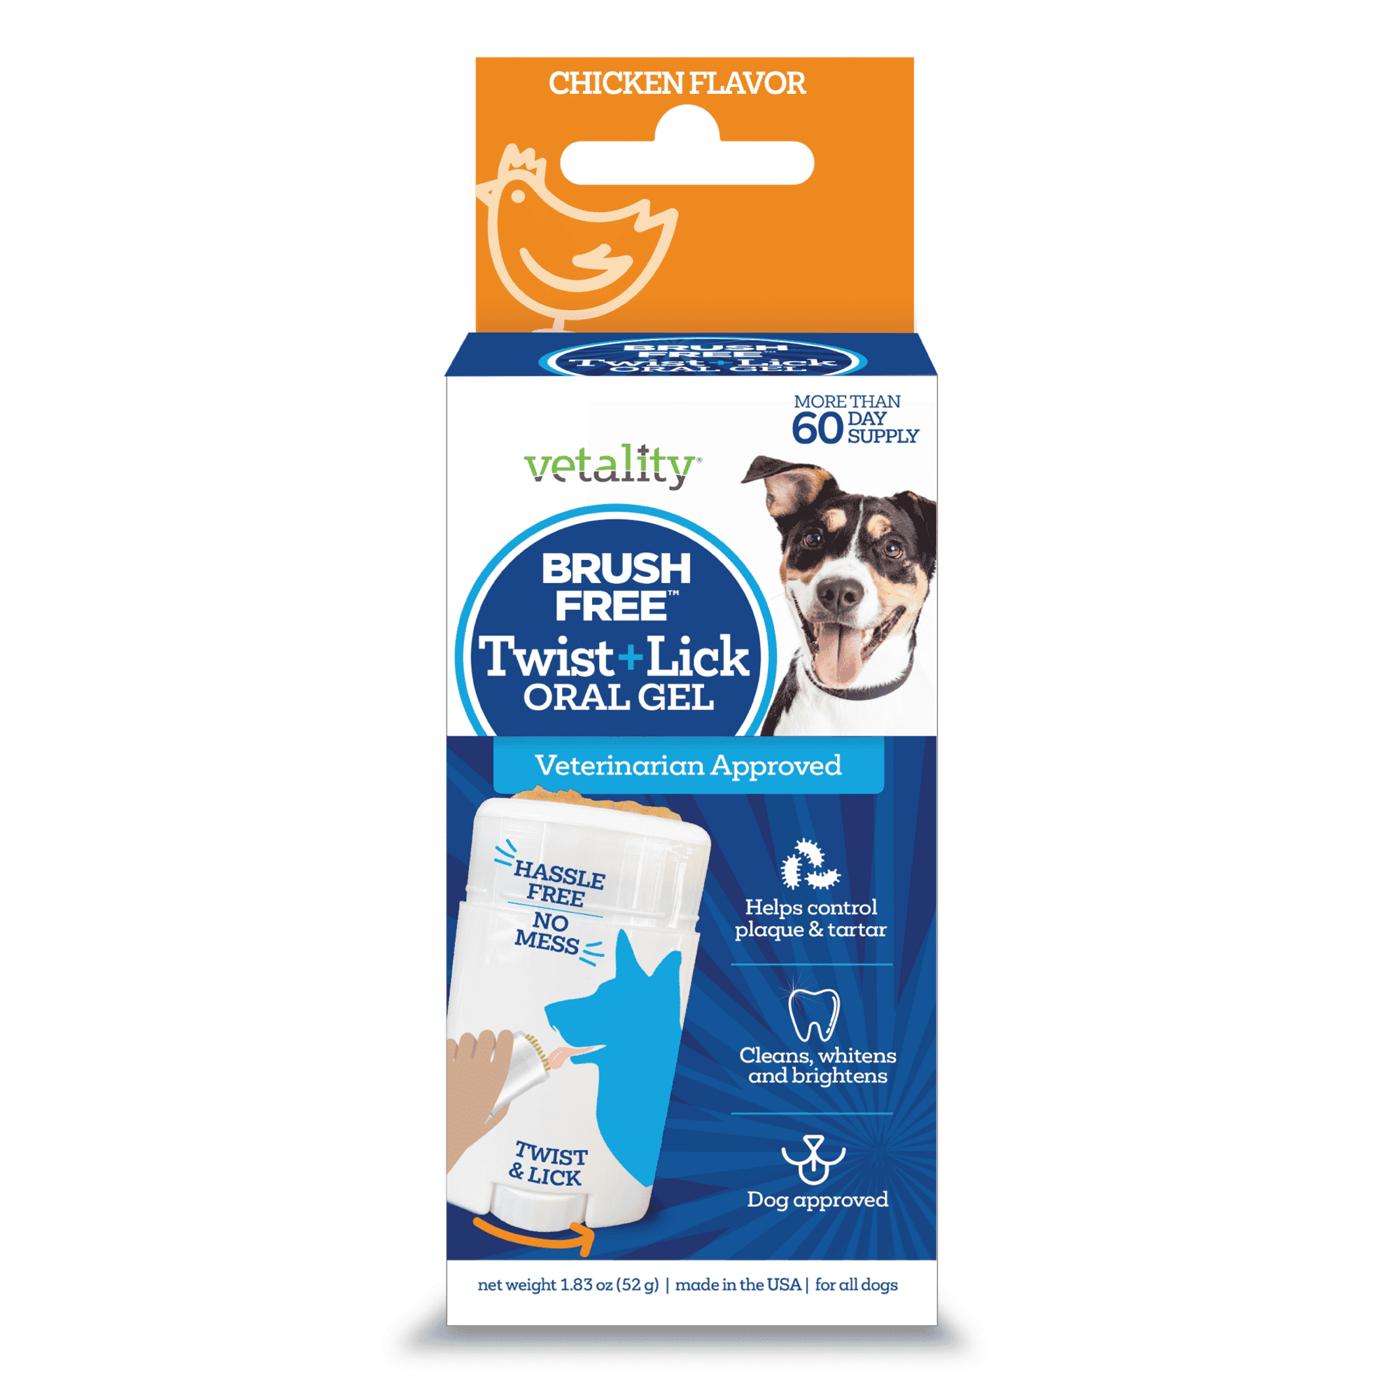 Vetality Brush Free Twist & Lick Oral Gel For Dogs - Chicken; image 1 of 3